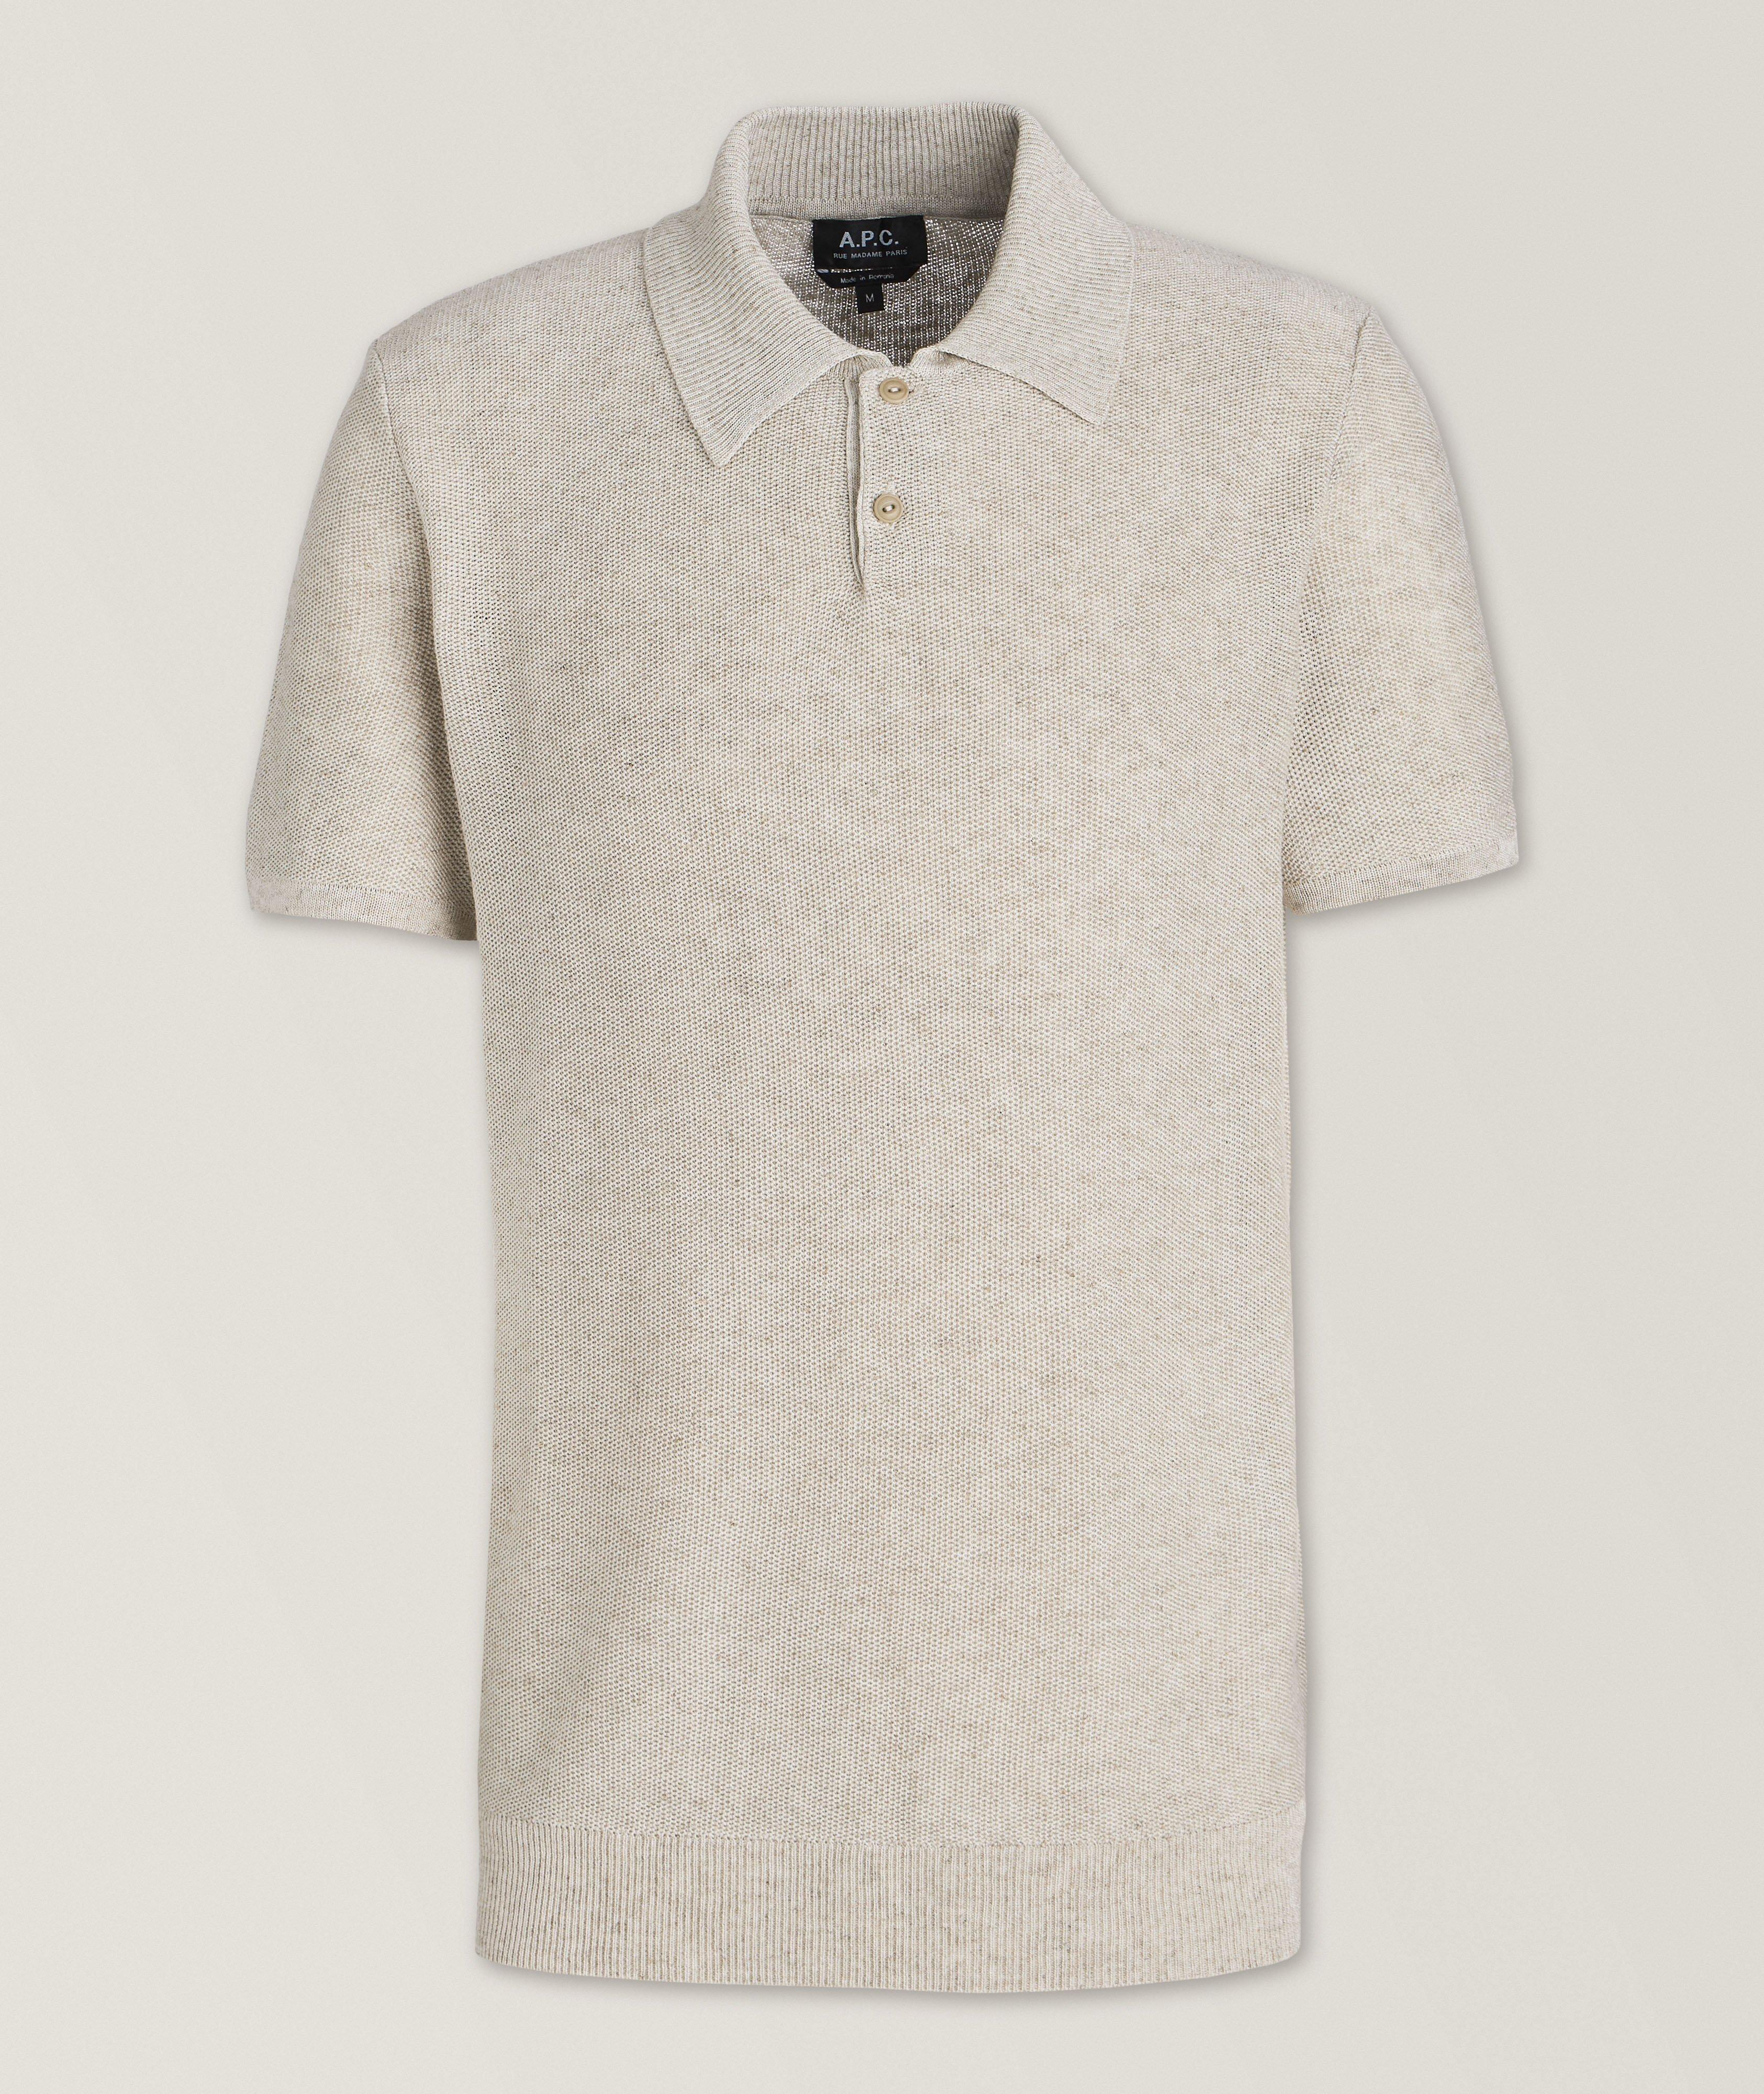 Jay Knitted Polo  image 0